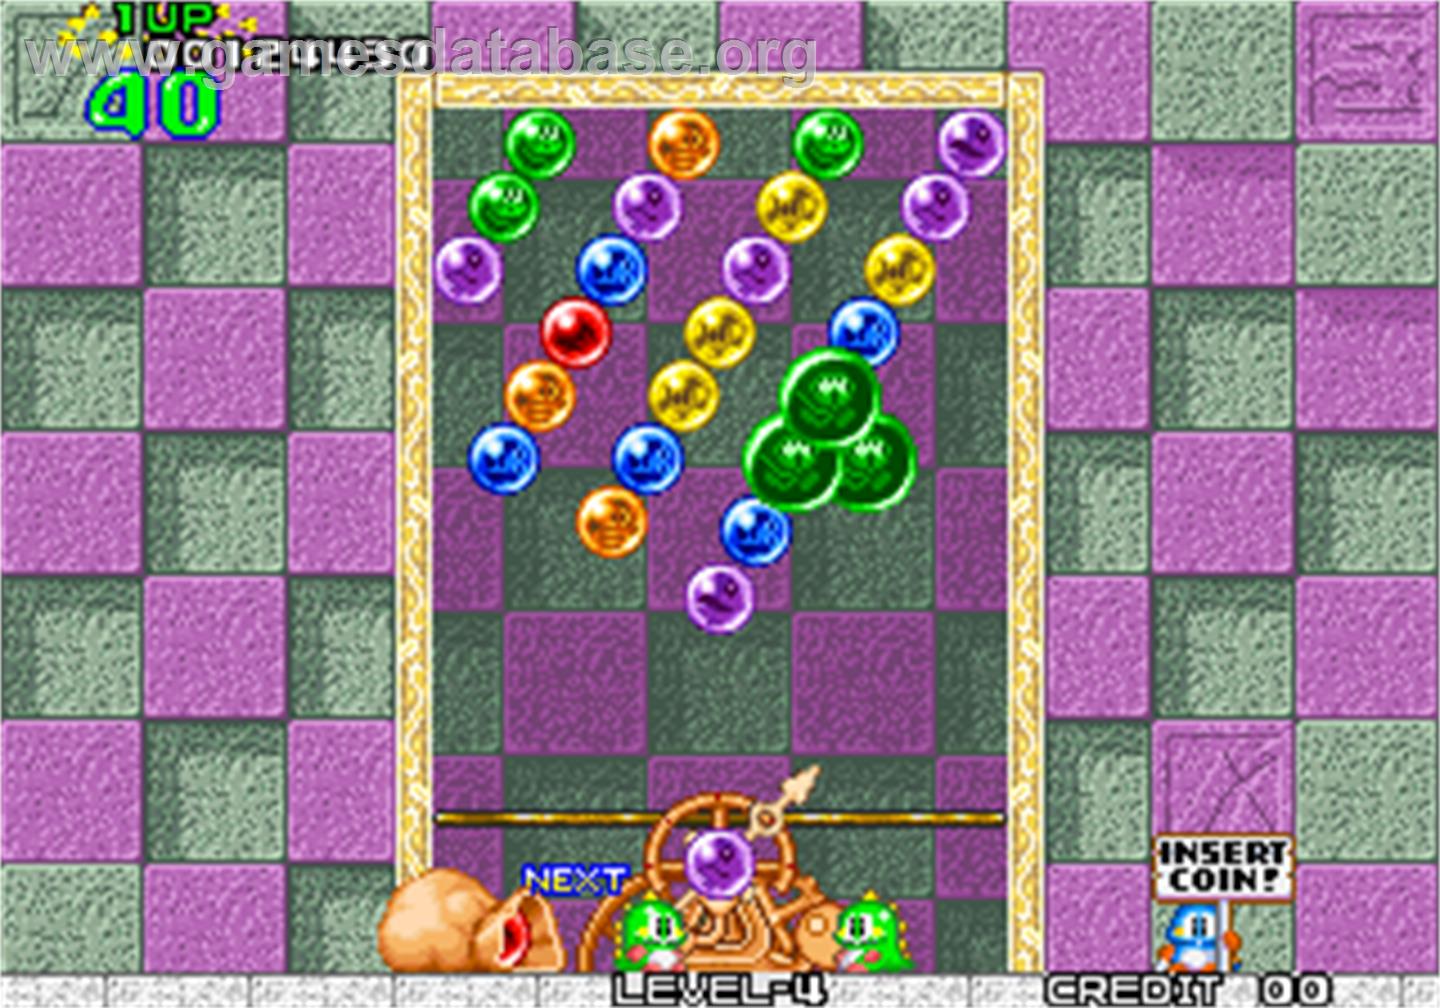 Puzzle Bobble / Bust-A-Move - Arcade - Artwork - In Game